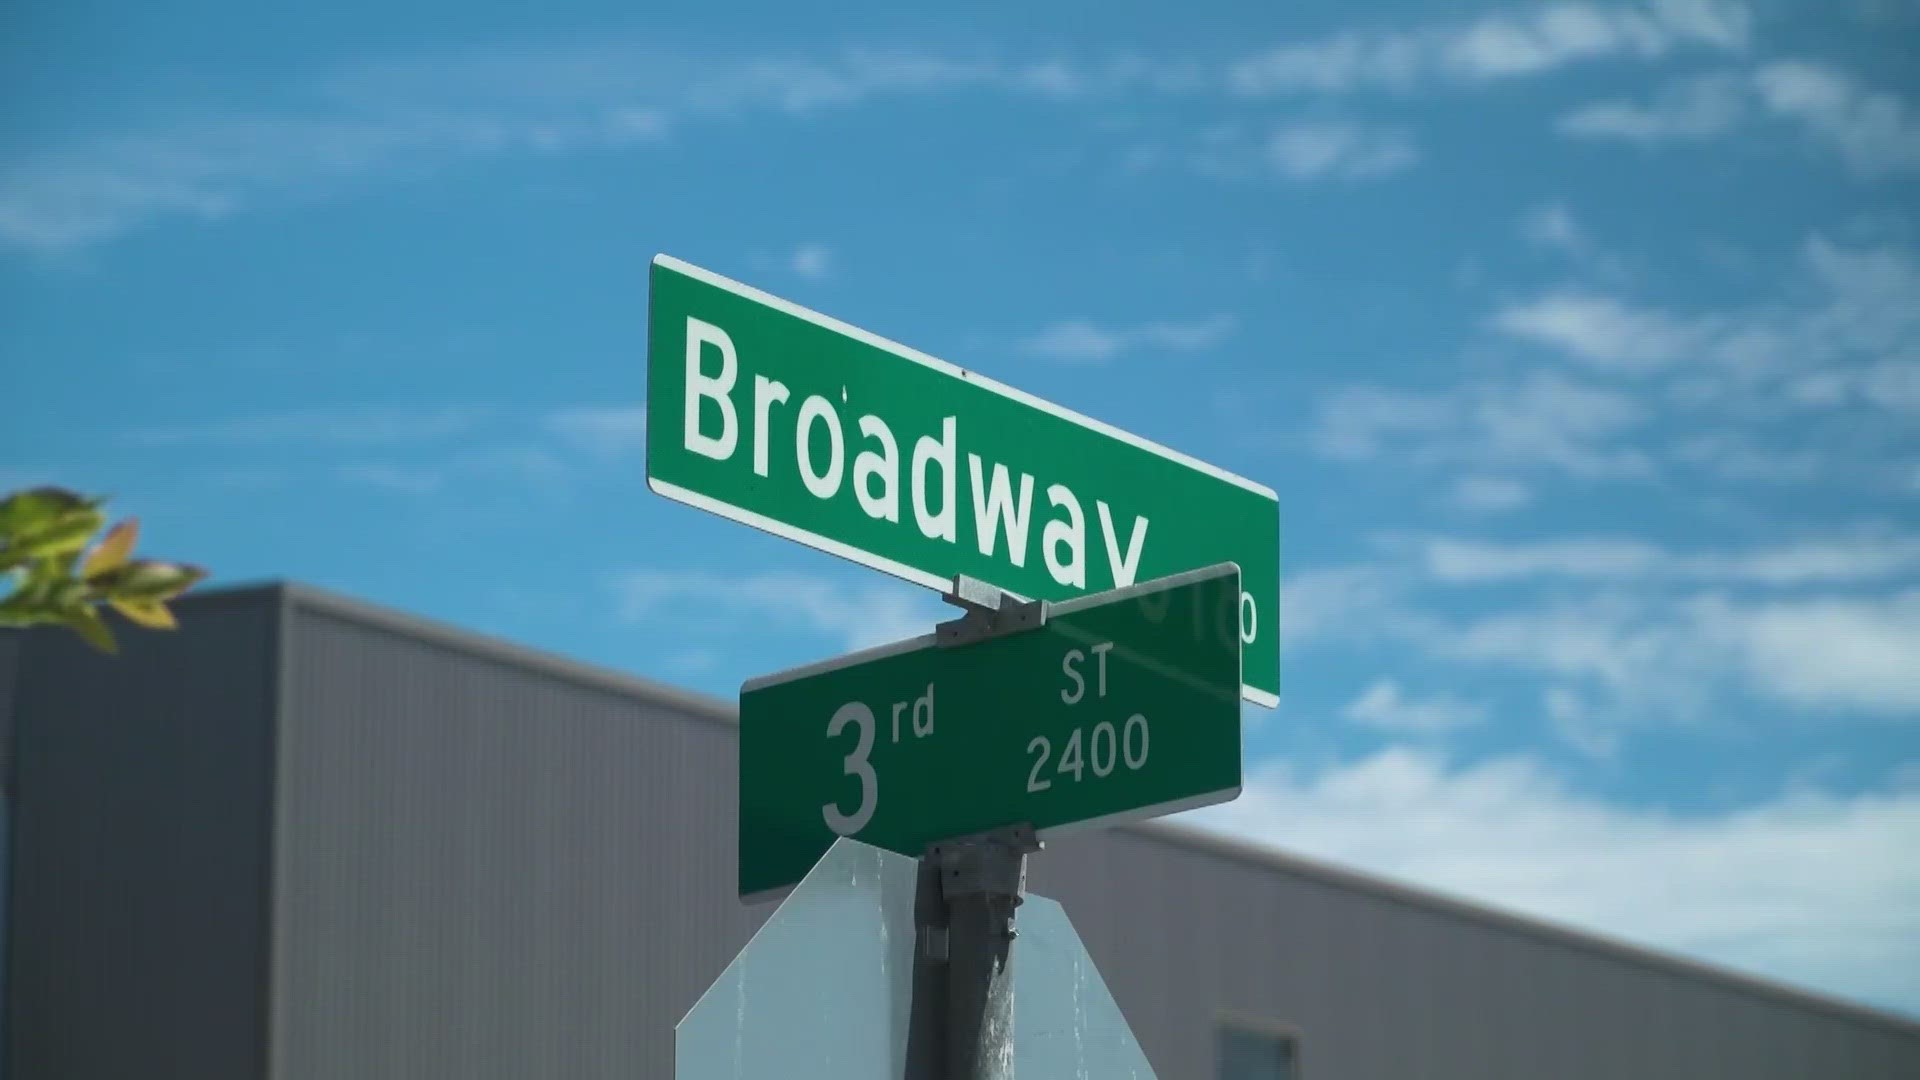 The Broadway Complete Streets project is located along a two-mile Broadway corridor between 3rd Street and 29th Street.